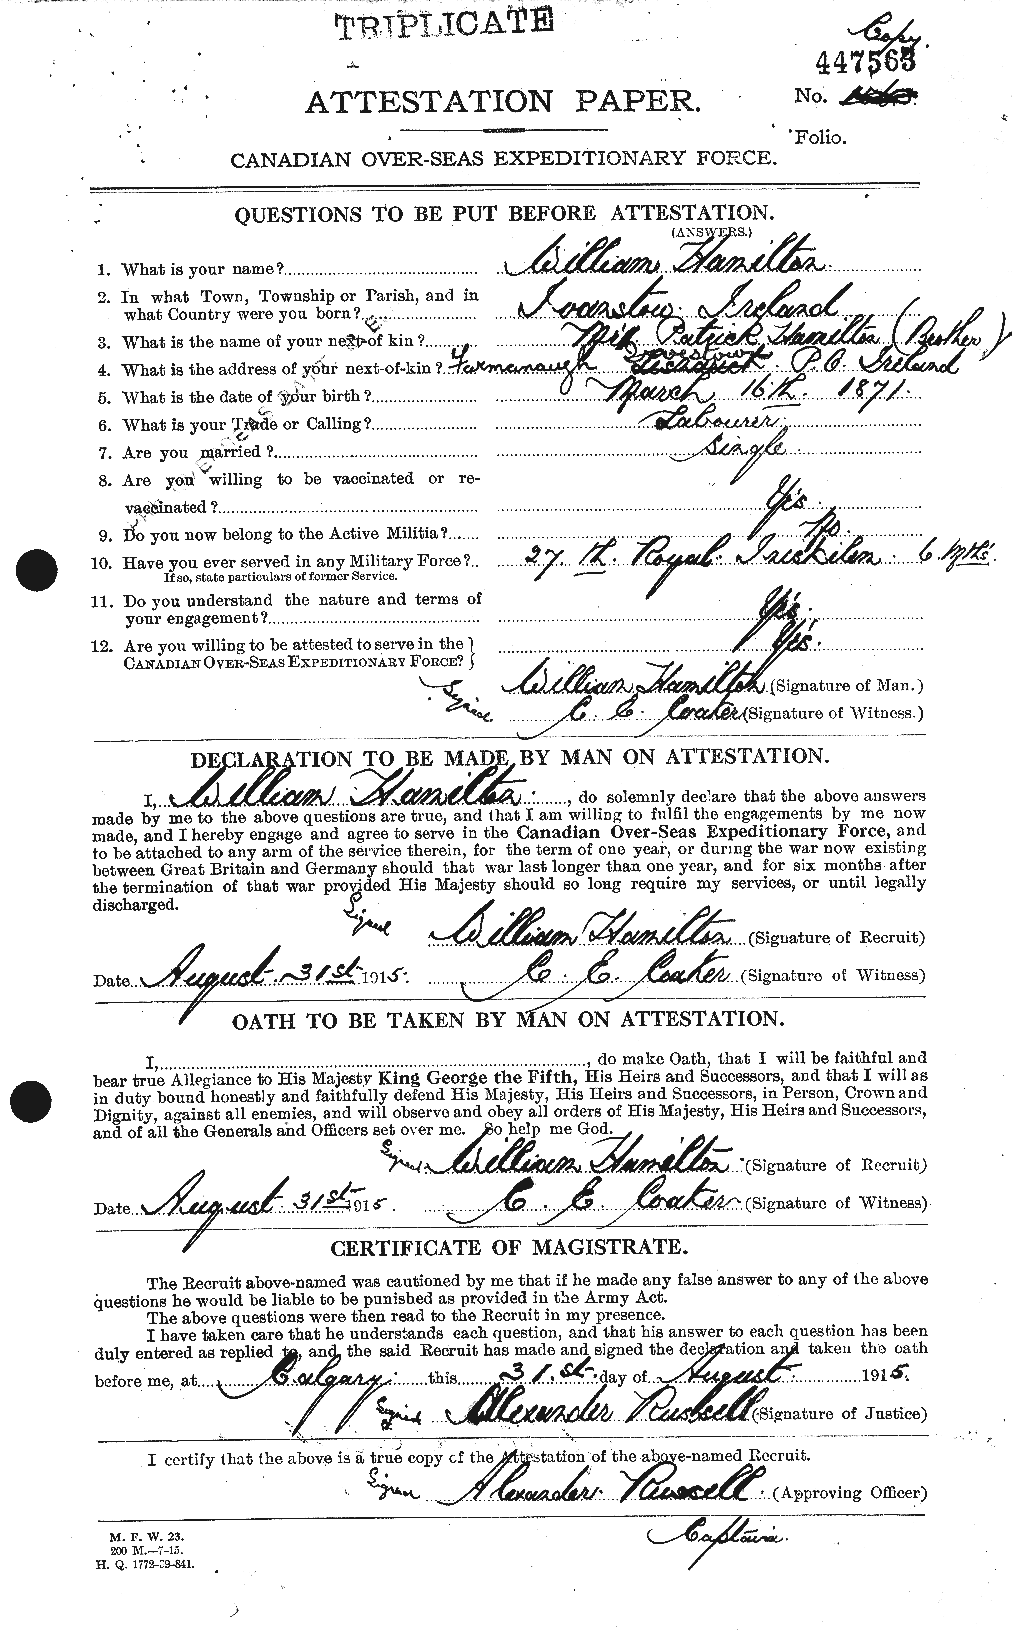 Personnel Records of the First World War - CEF 374836a